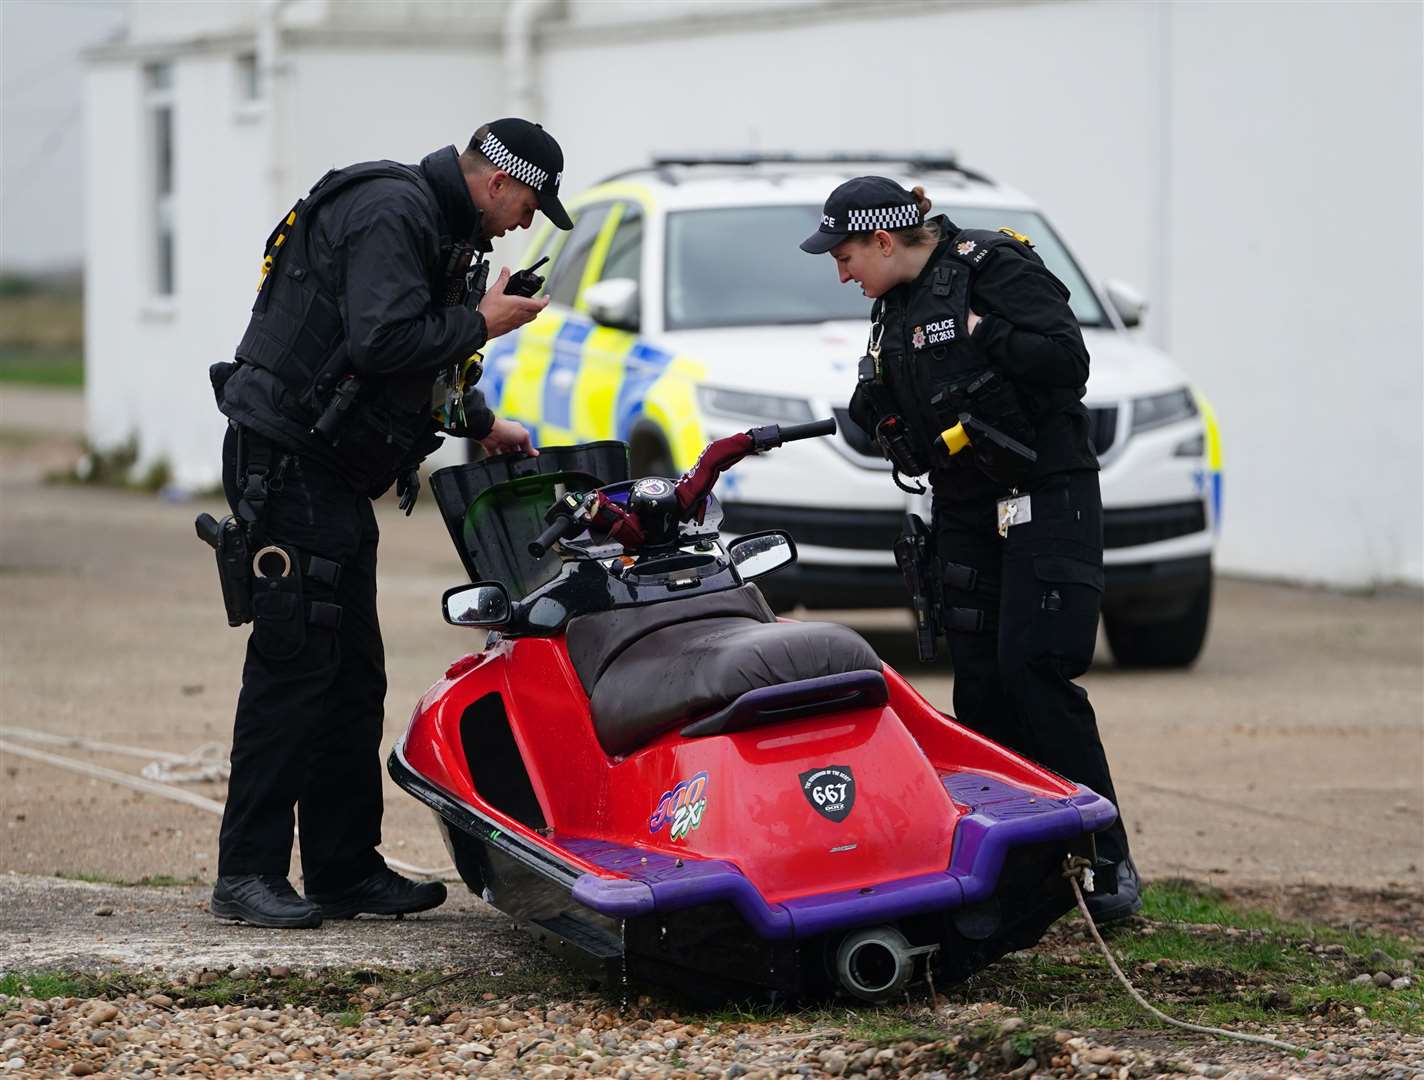 A jet ski thought to have been used in a migrant crossing is inspected by police after being brought in to Dungeness, Kent (Gareth Fuller/PA)